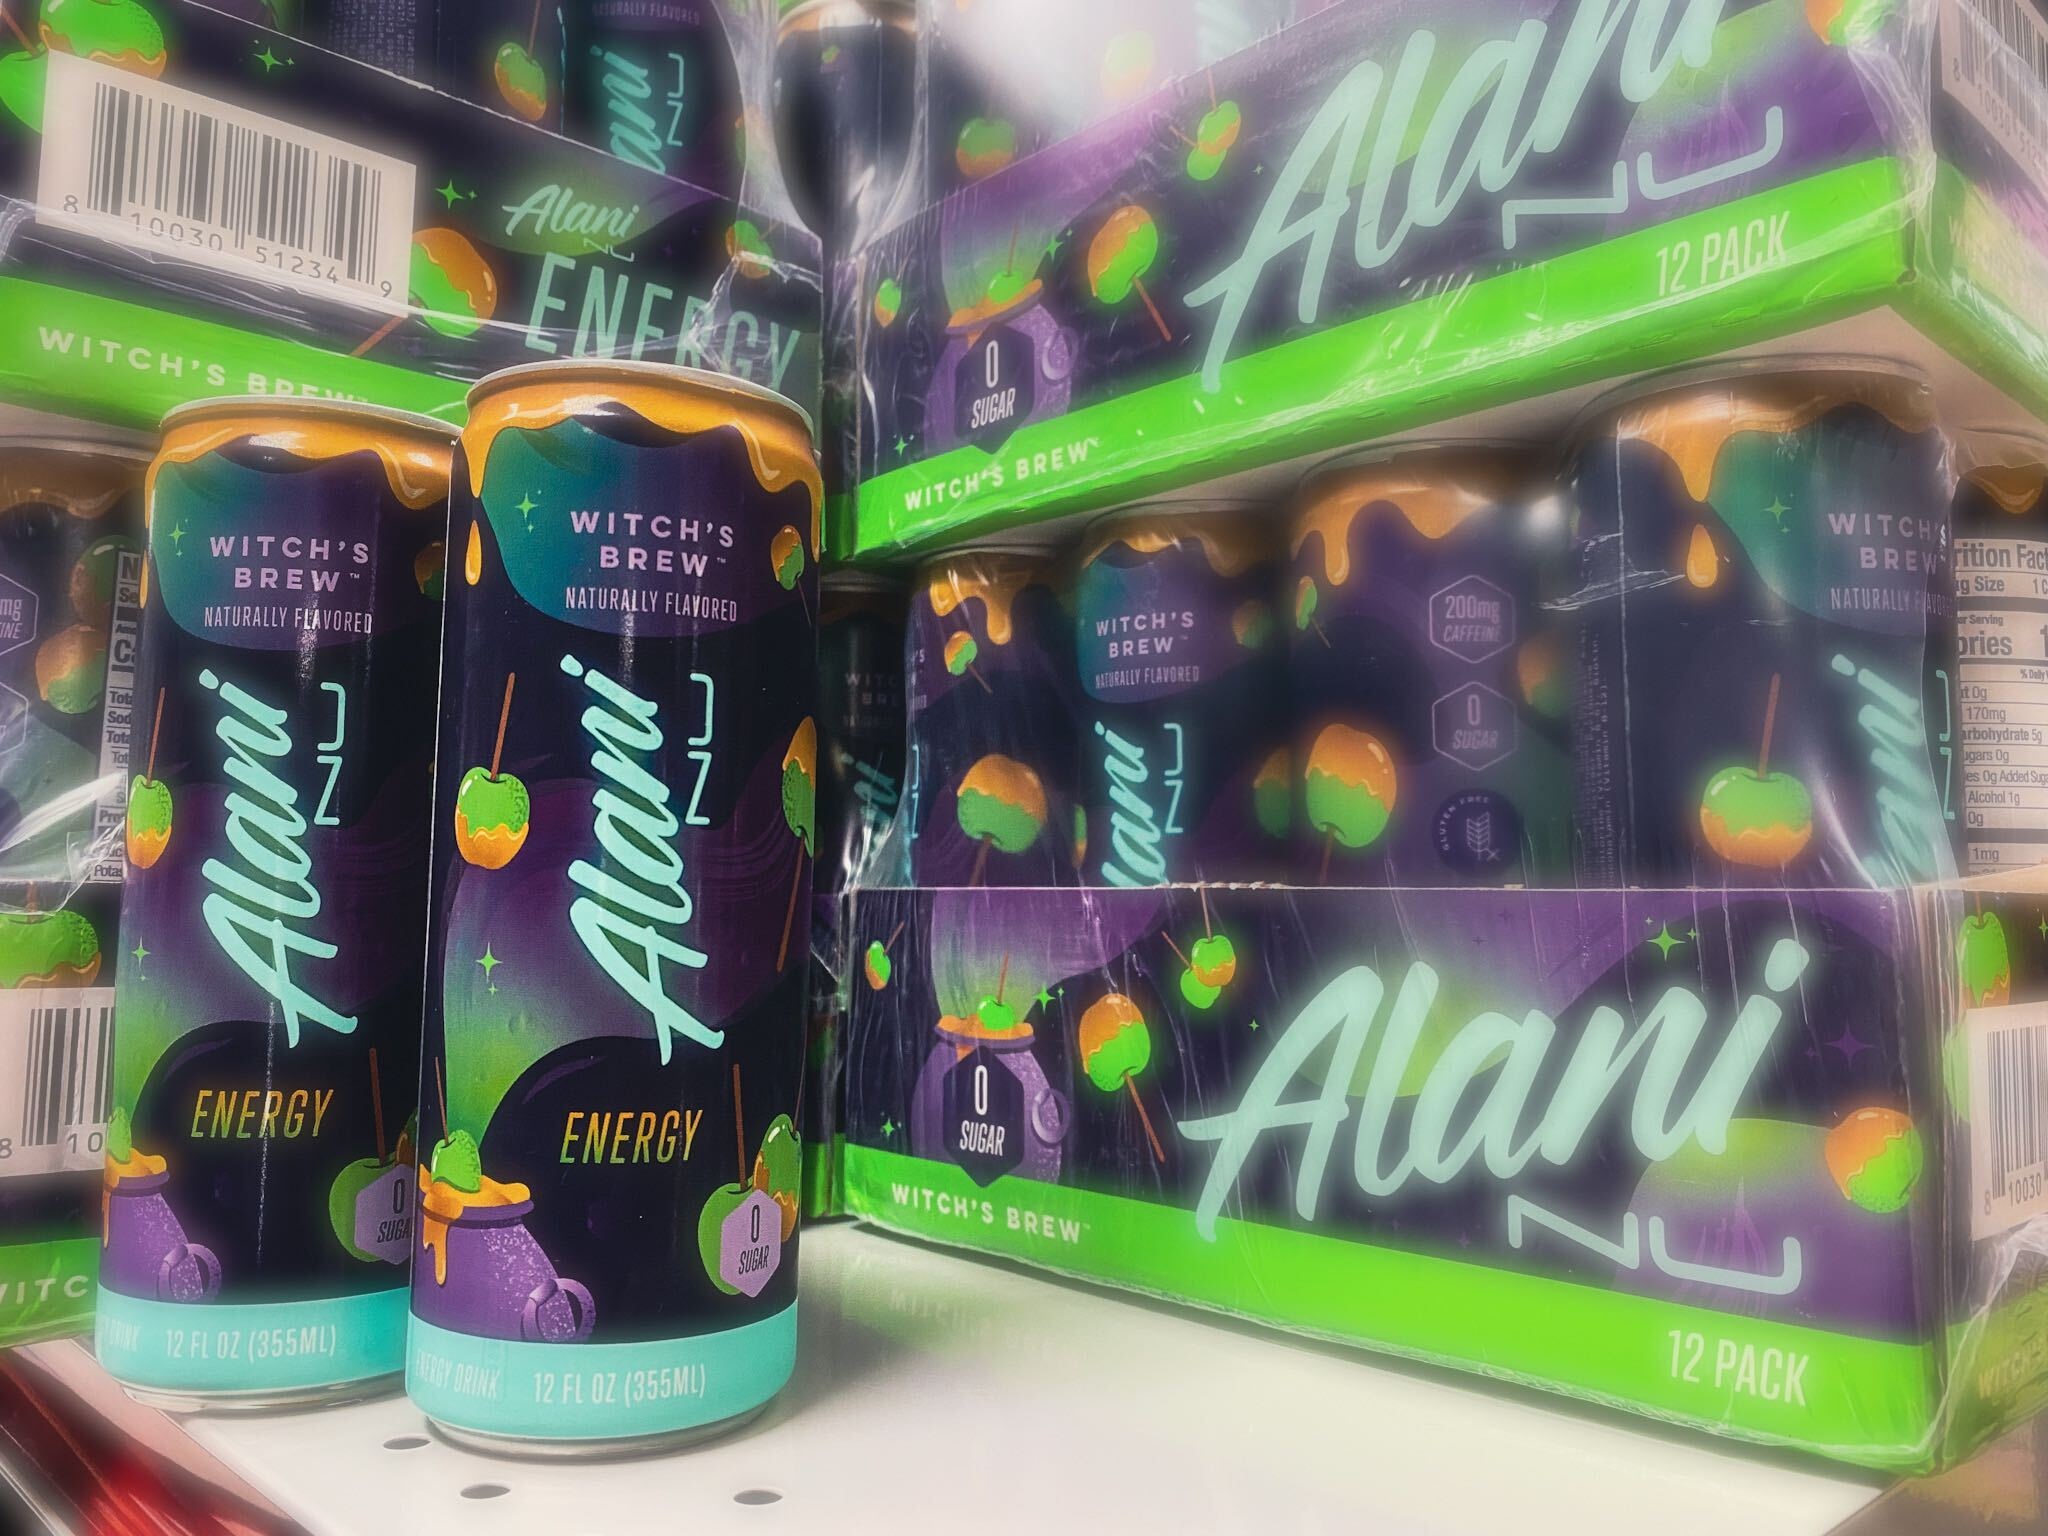 Alani Nu Energy Witch's Brew Energy Drink XN Supplements